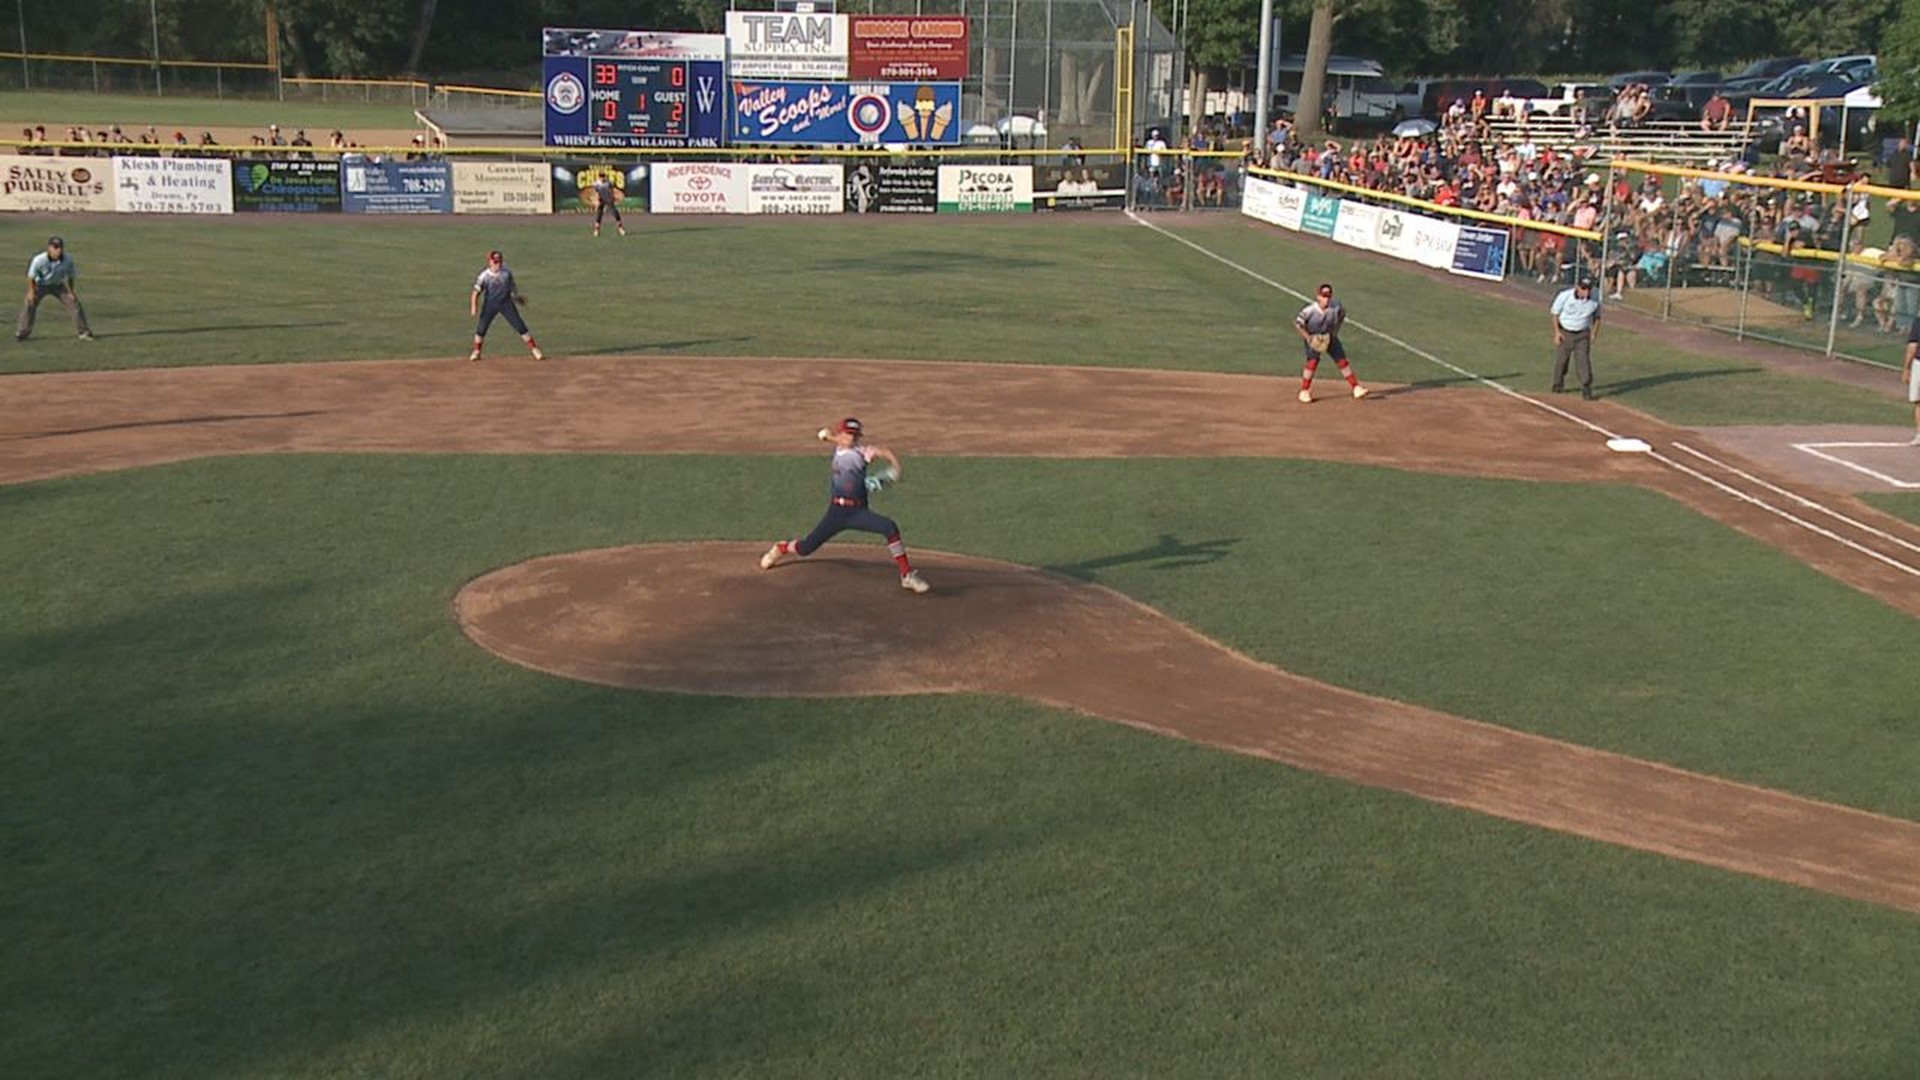 Down 7-2, Greater Pittston Little League Scores 7 Unanswered Runs to Win and Advance in the Winner's Bracket